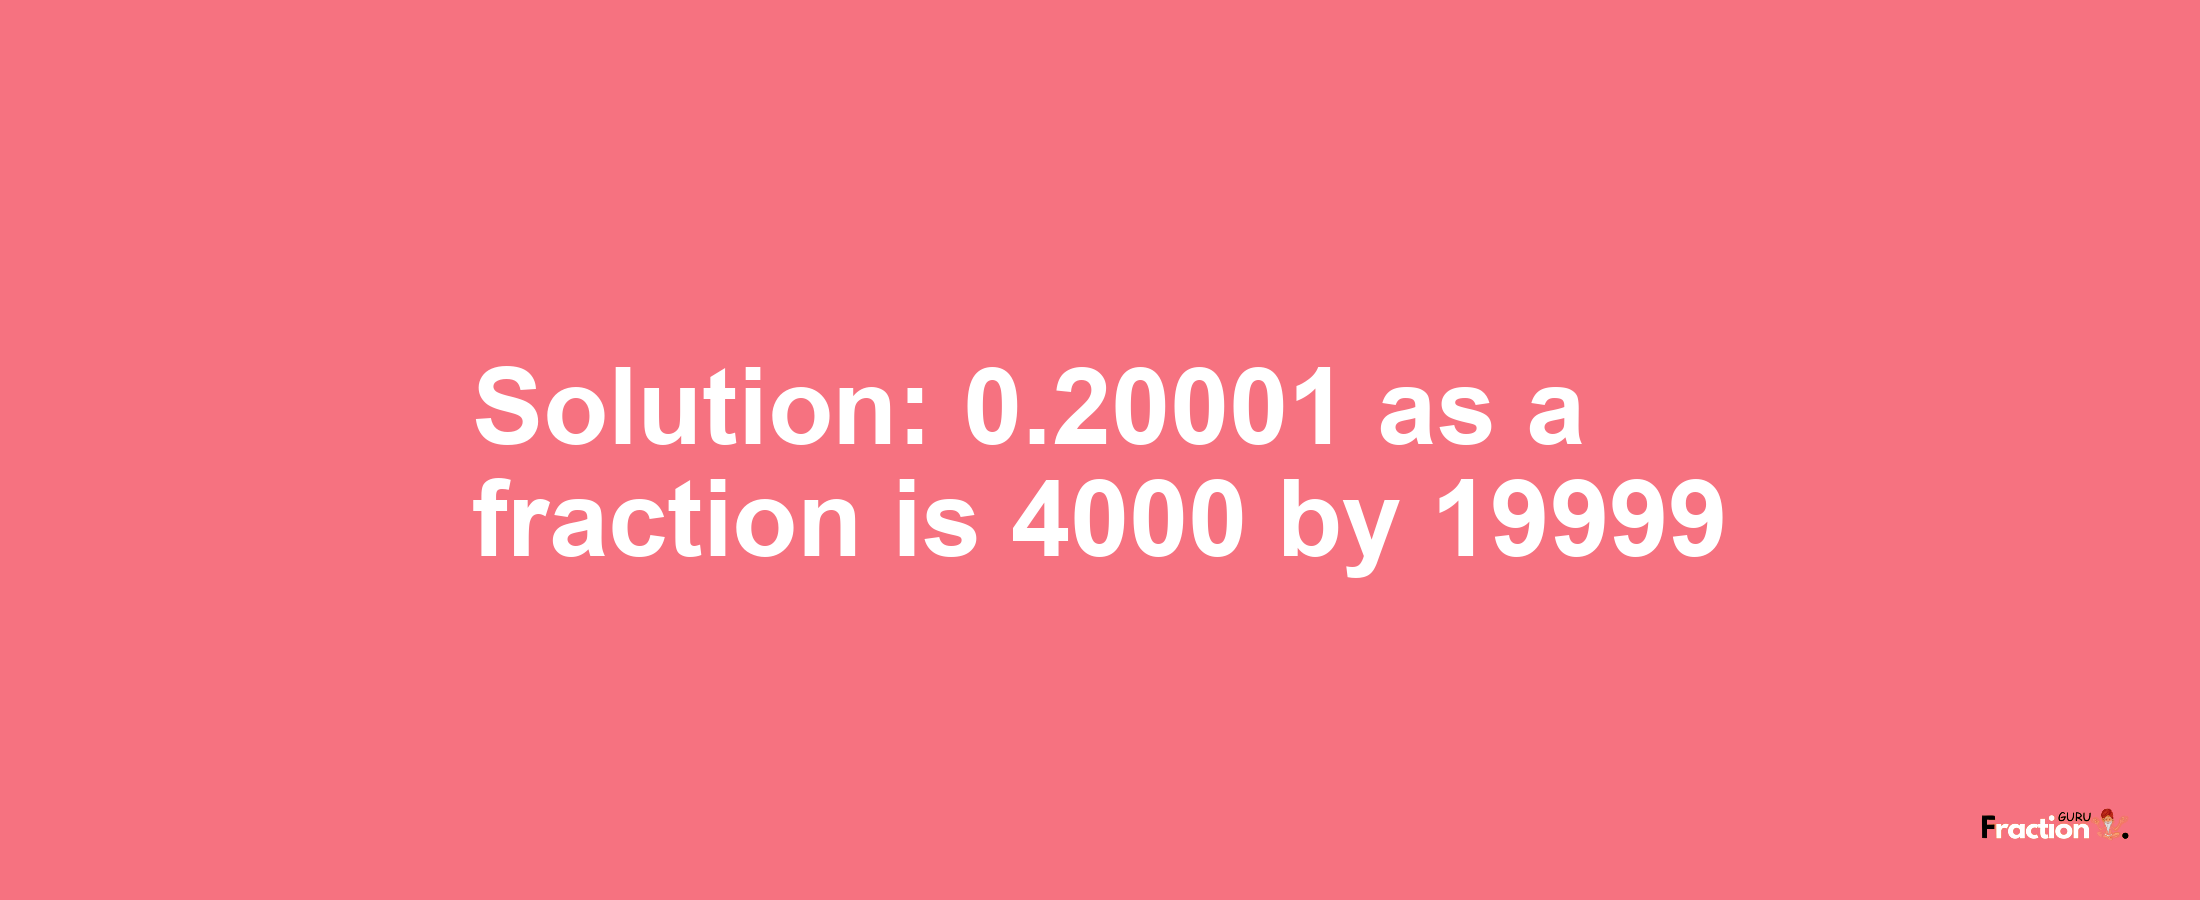 Solution:0.20001 as a fraction is 4000/19999